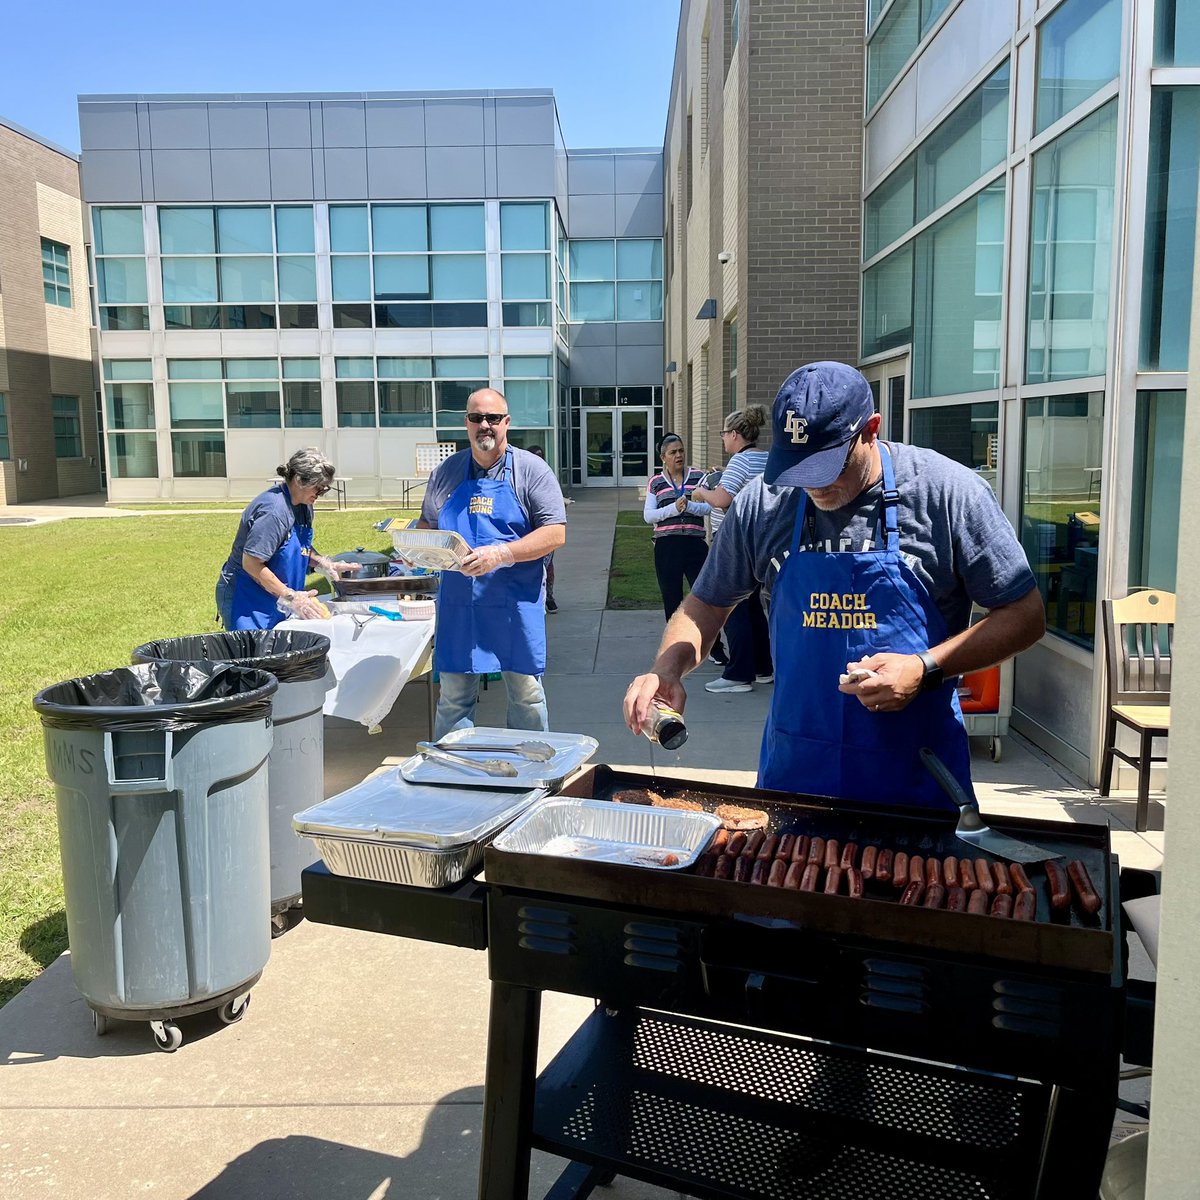 Shout out to @leisdathletics Admin for serving our teachers during lunch today! Food was great, thanks! @littleelmisd @littleelmhs